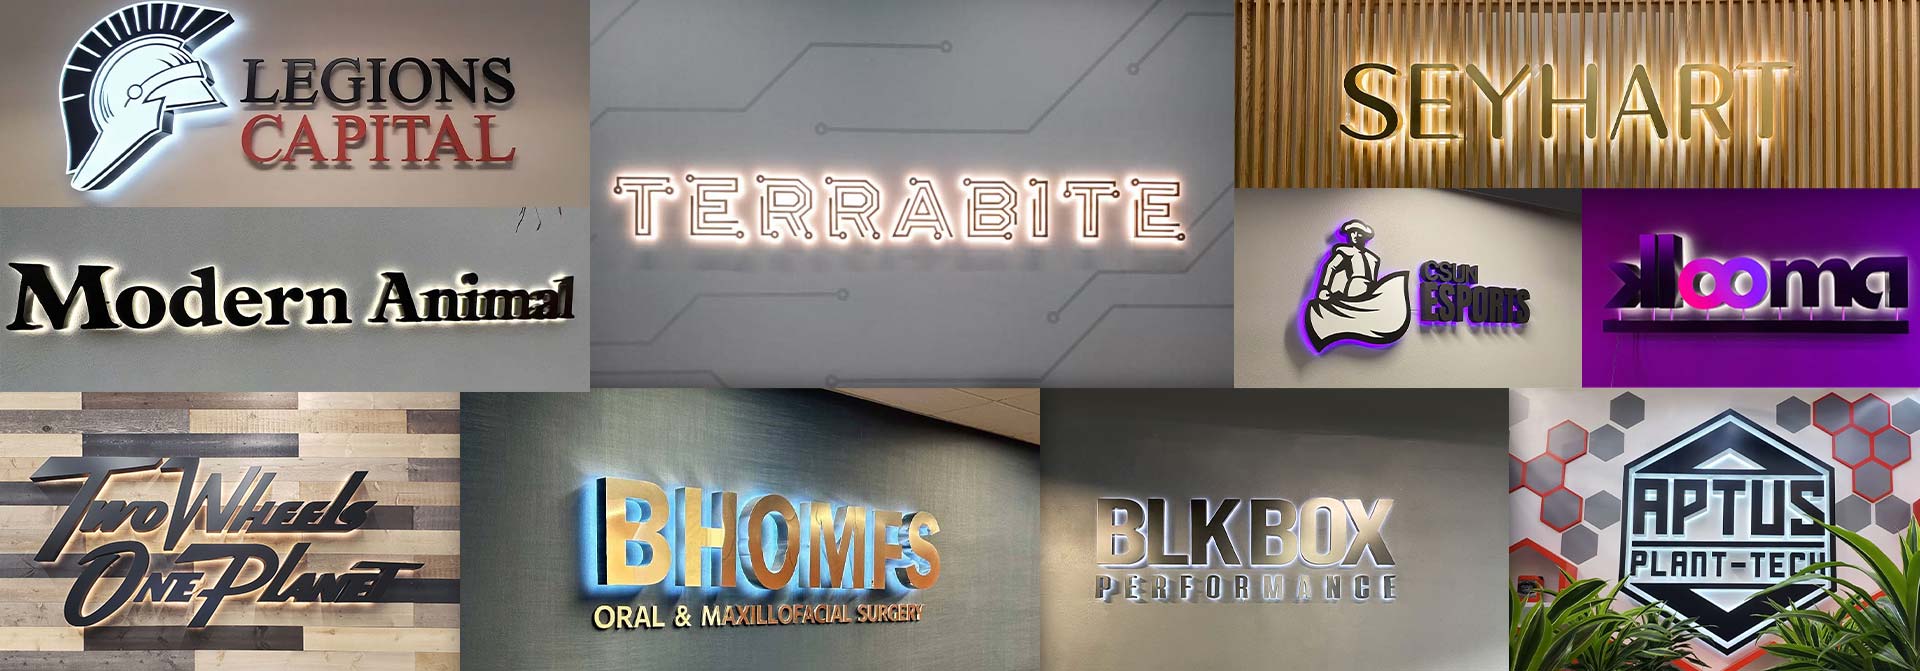 Branded backlit wall art displays set up in different corporate venues